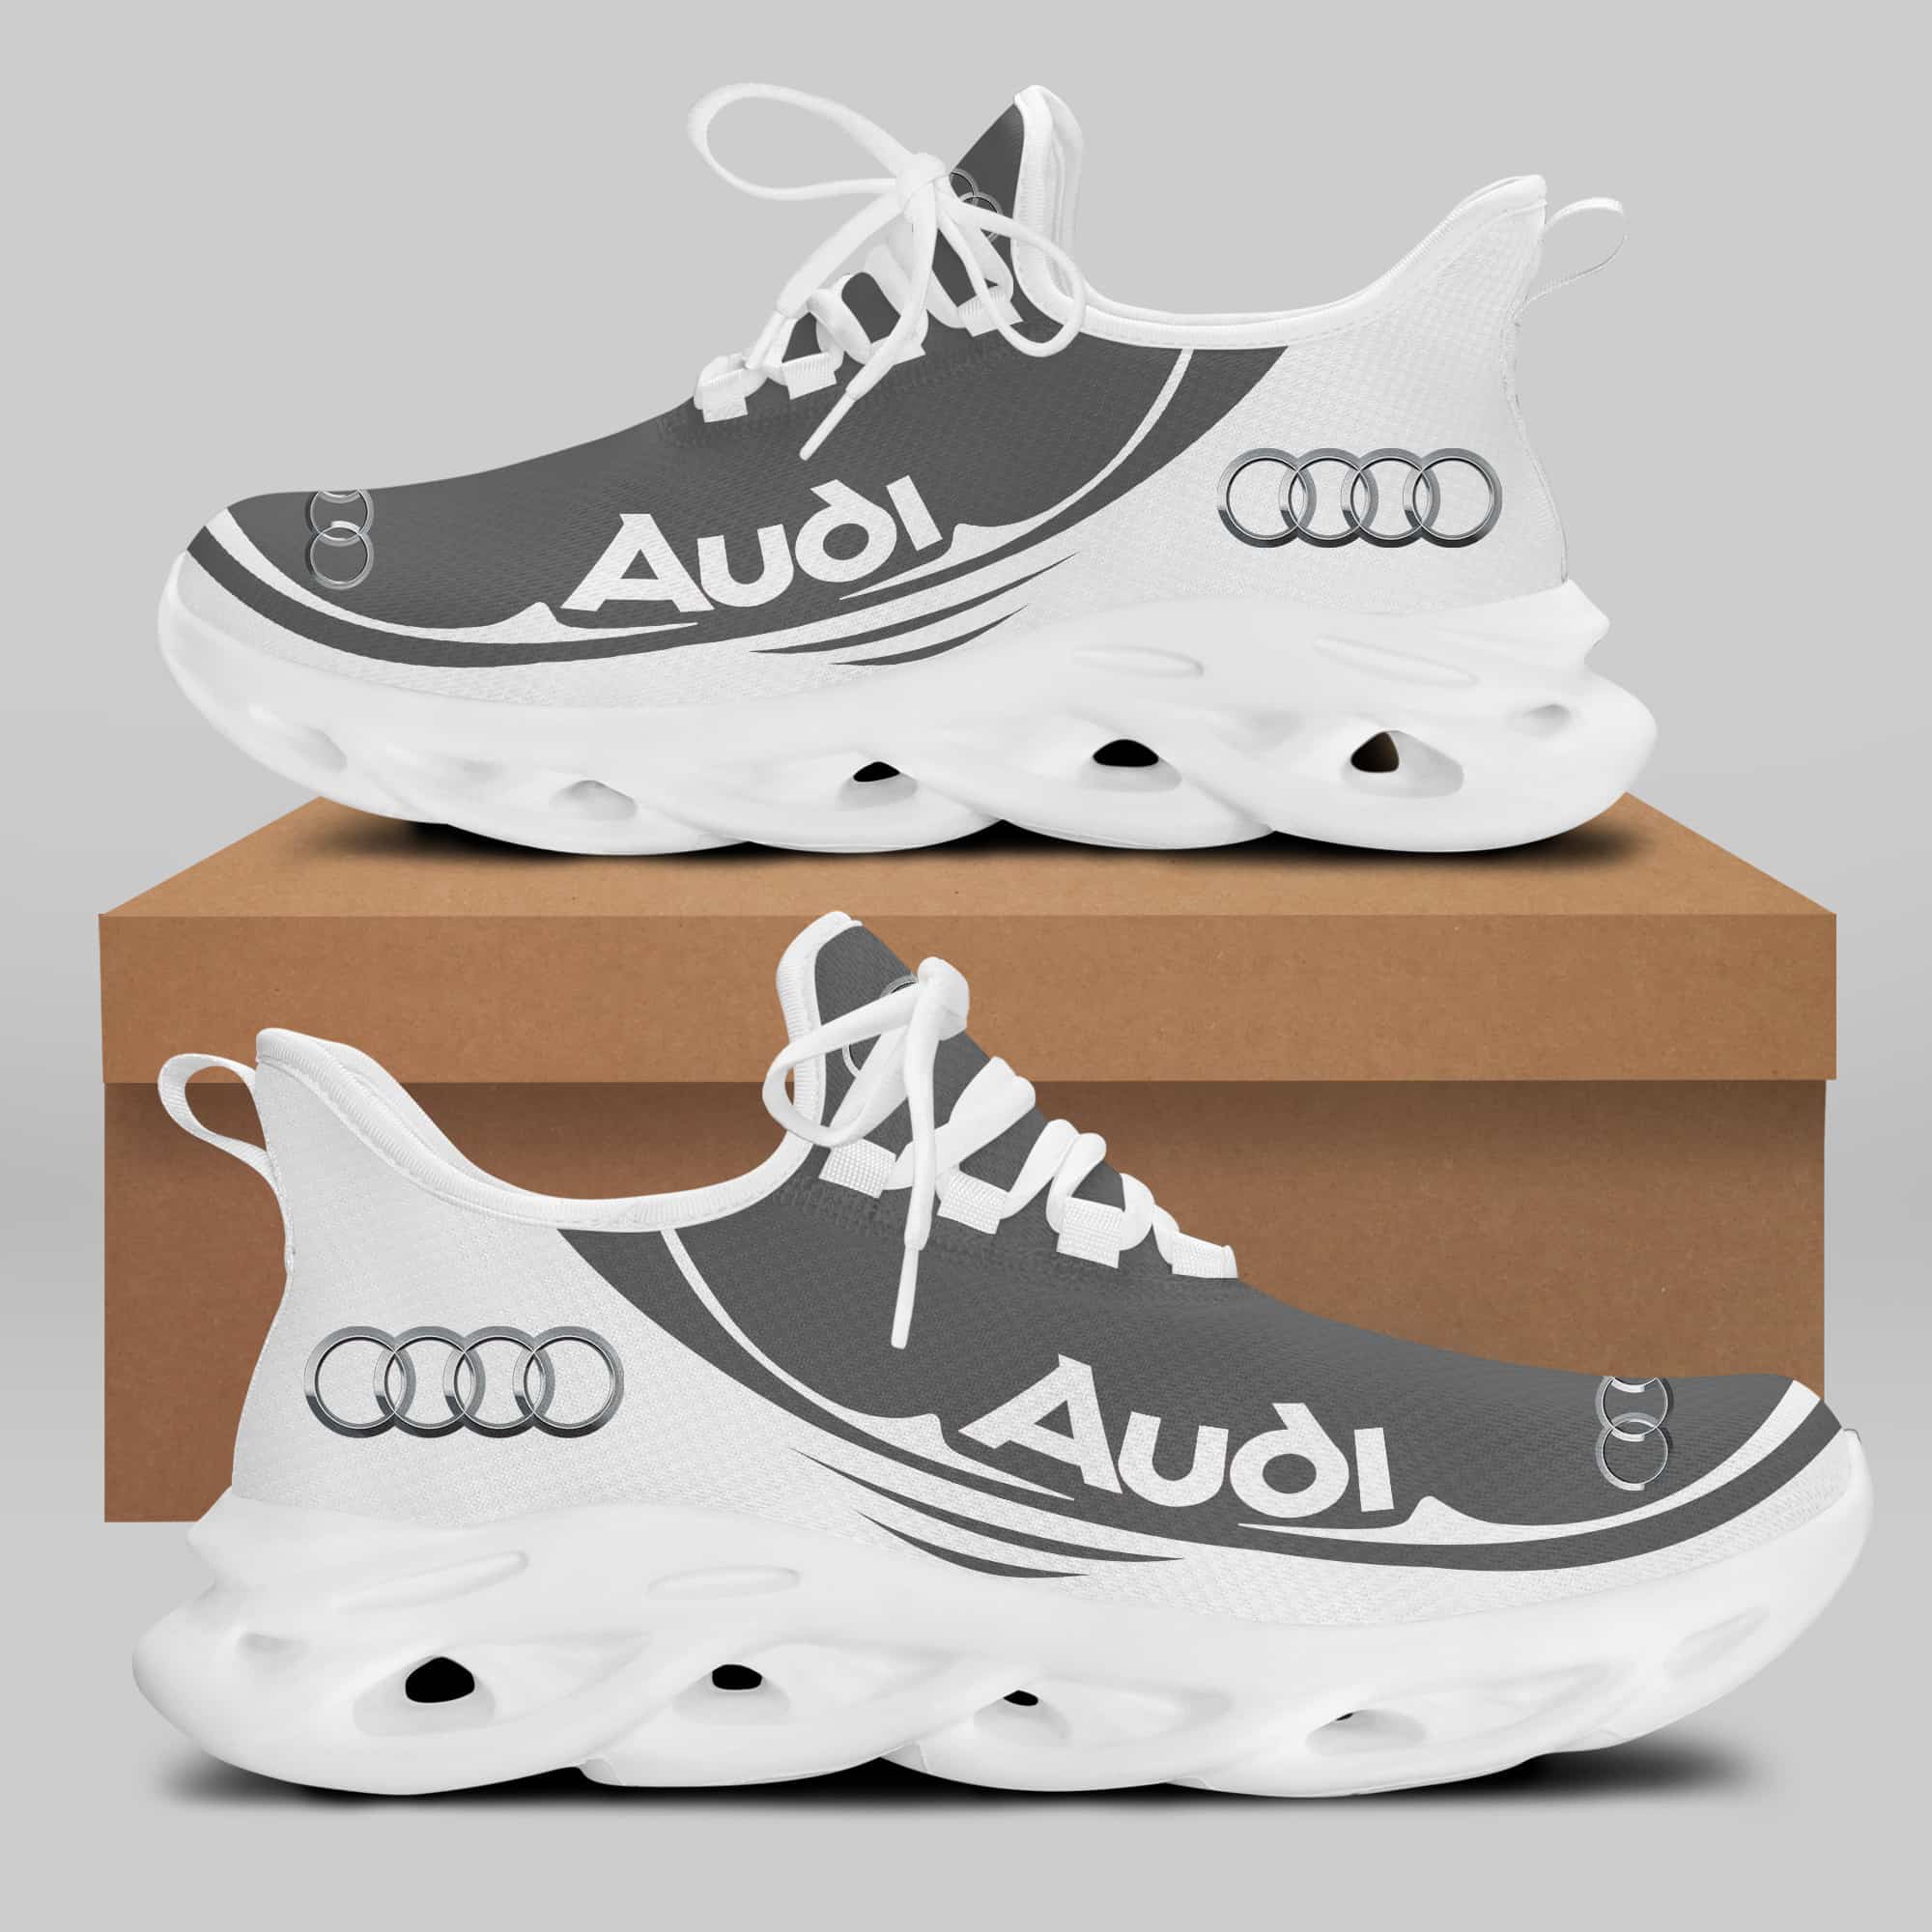 Audi Sport Running Shoes Max Soul Shoes Sneakers Ver 41 1